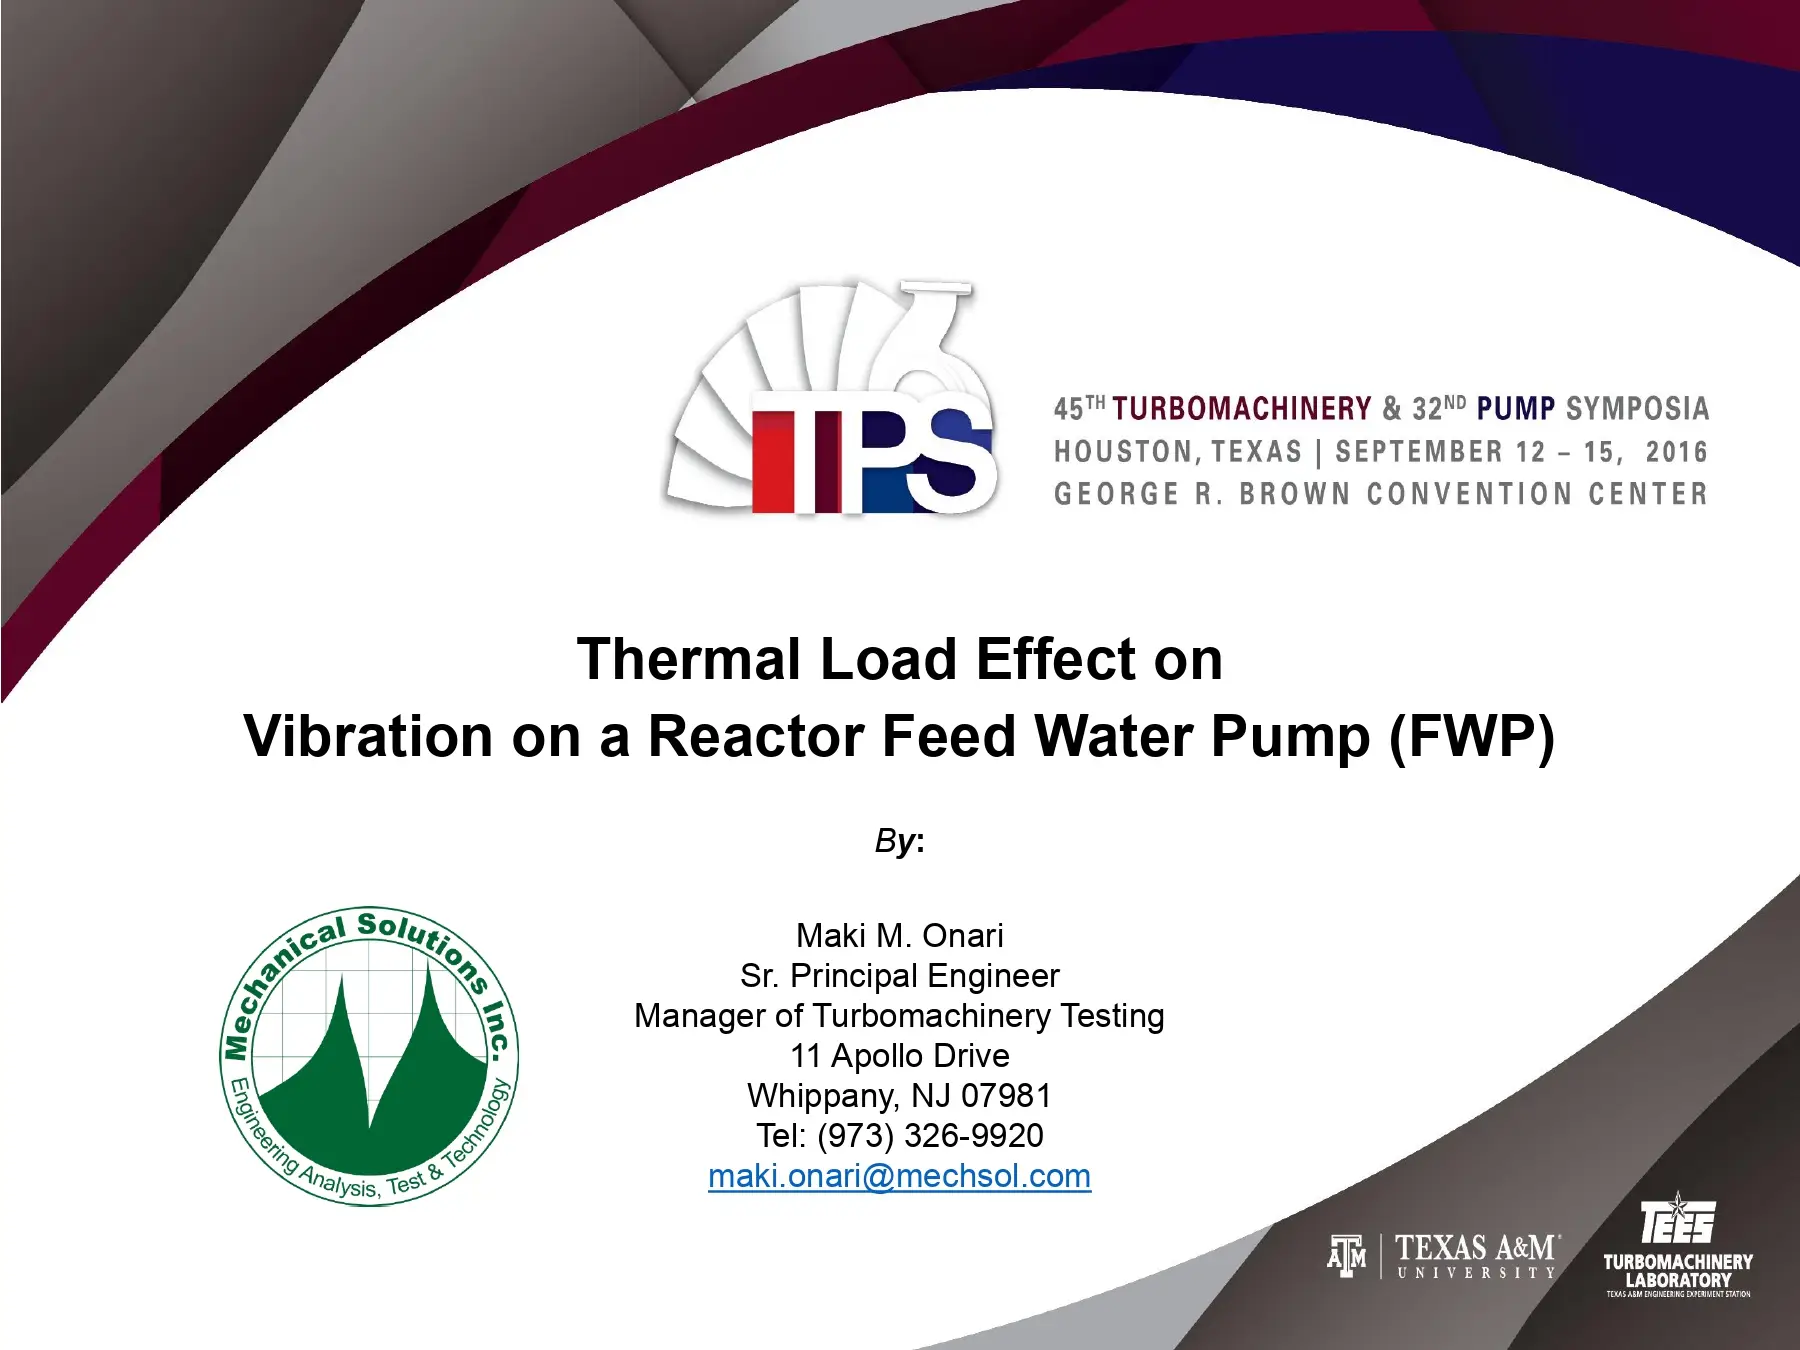 Thermal Load Effect on Vibration on a Reactor Feed Water Pump (FWP)